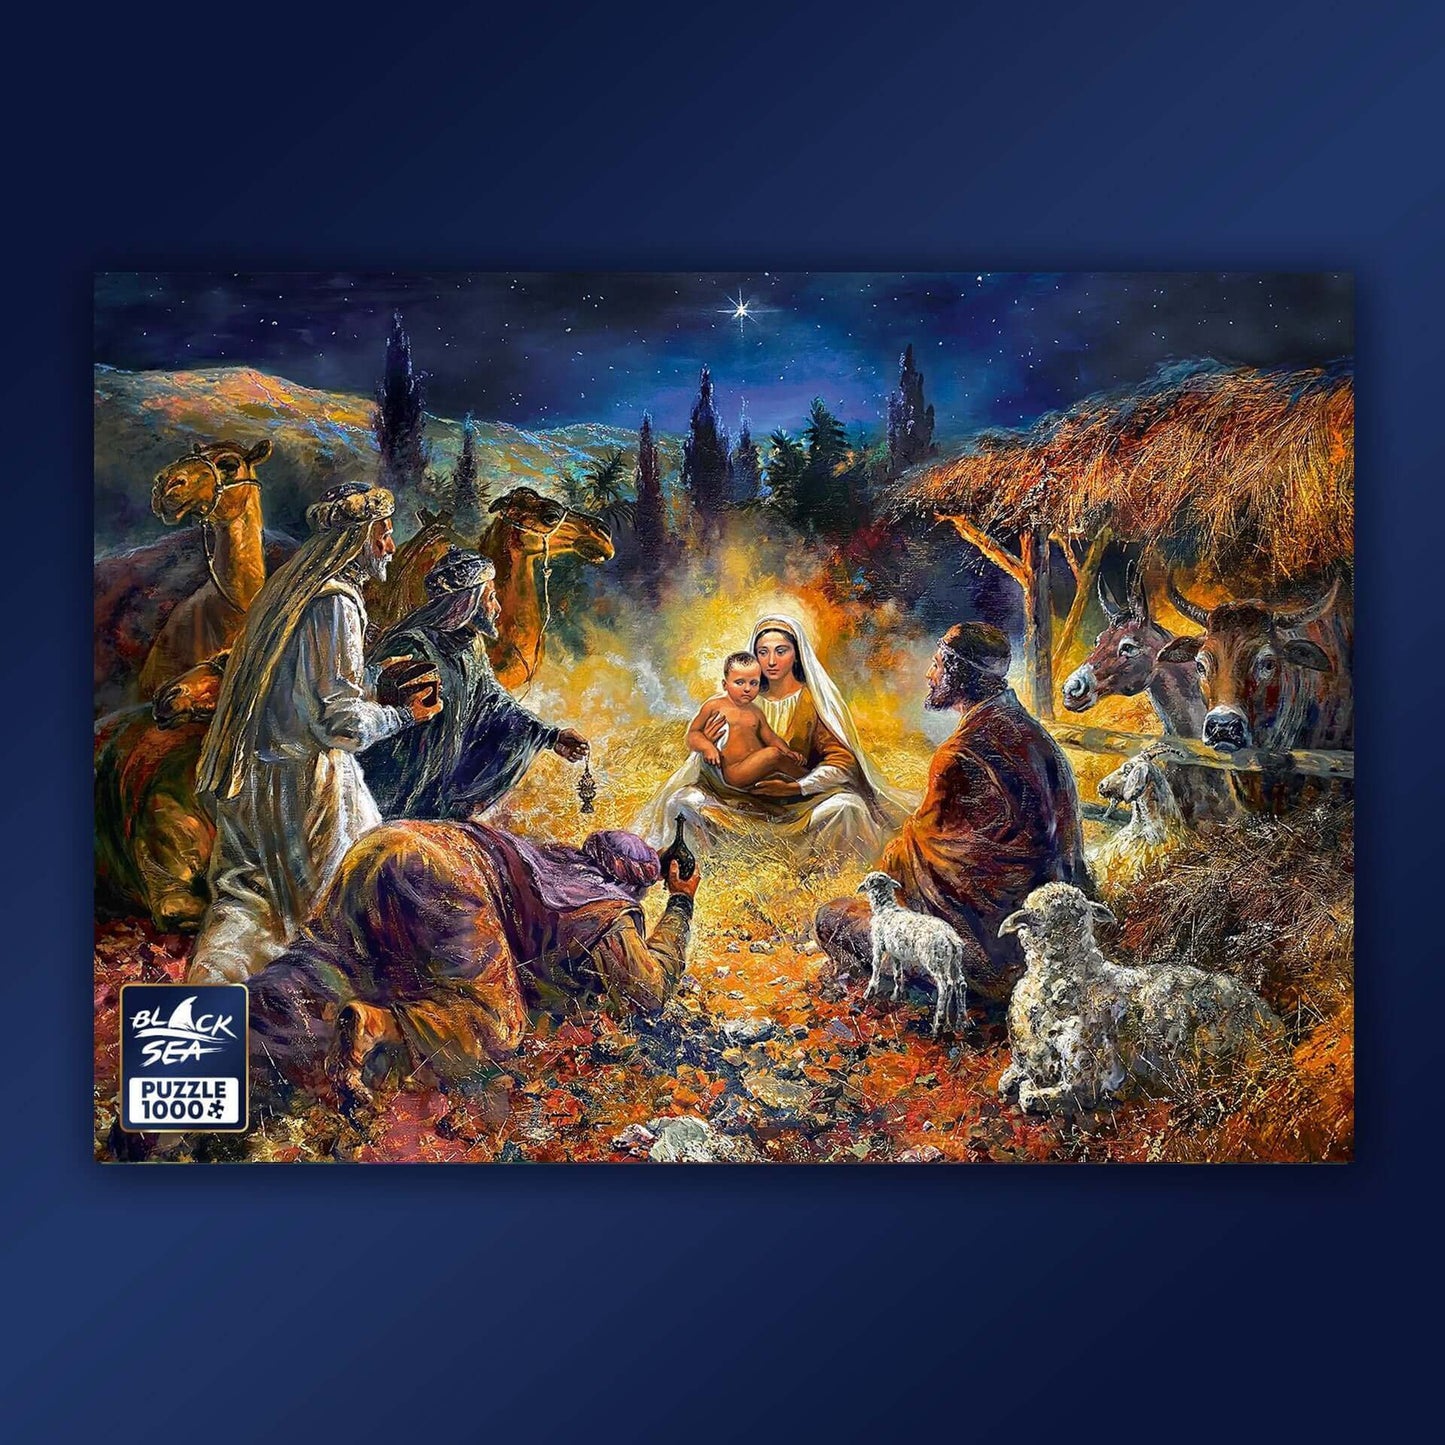 Puzzle Black Sea Premium 1000 pieces - The Magi Pay Homage, The Bulgarian artist Vasil Goranov presents an extraordinary interpretation based on the classical scene from the Bible, depicting the homage paid by the Magi to the new-born Saviour. The picture